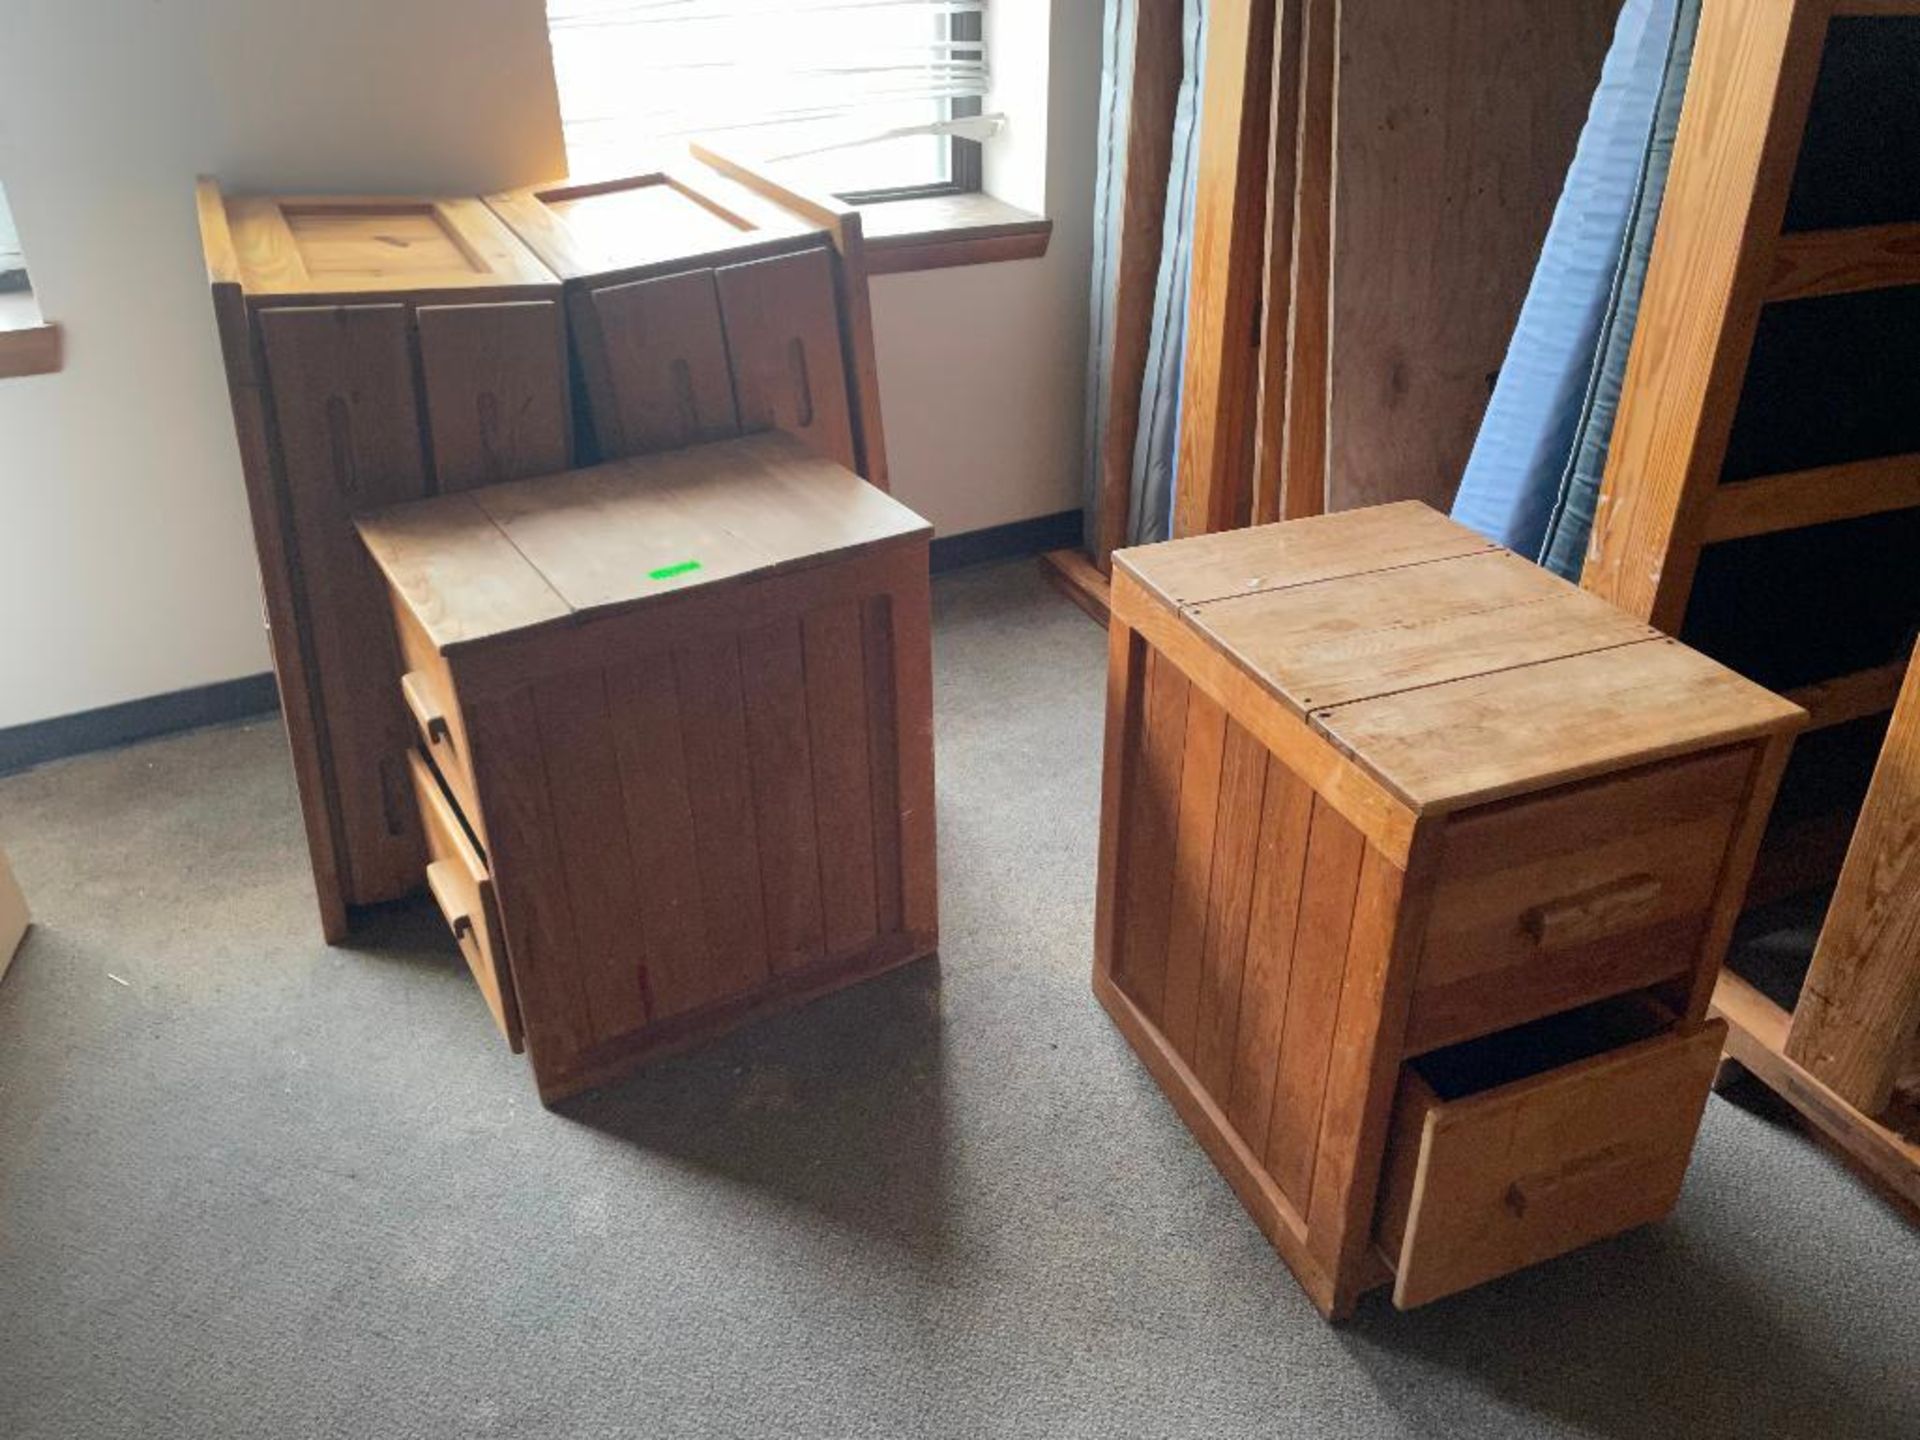 DESCRIPTION: ASSORTED BEDROOM FURNITURE ADDITIONAL INFORMATION: SOLD AS SET. THIS LOT IS: ONE MONEY